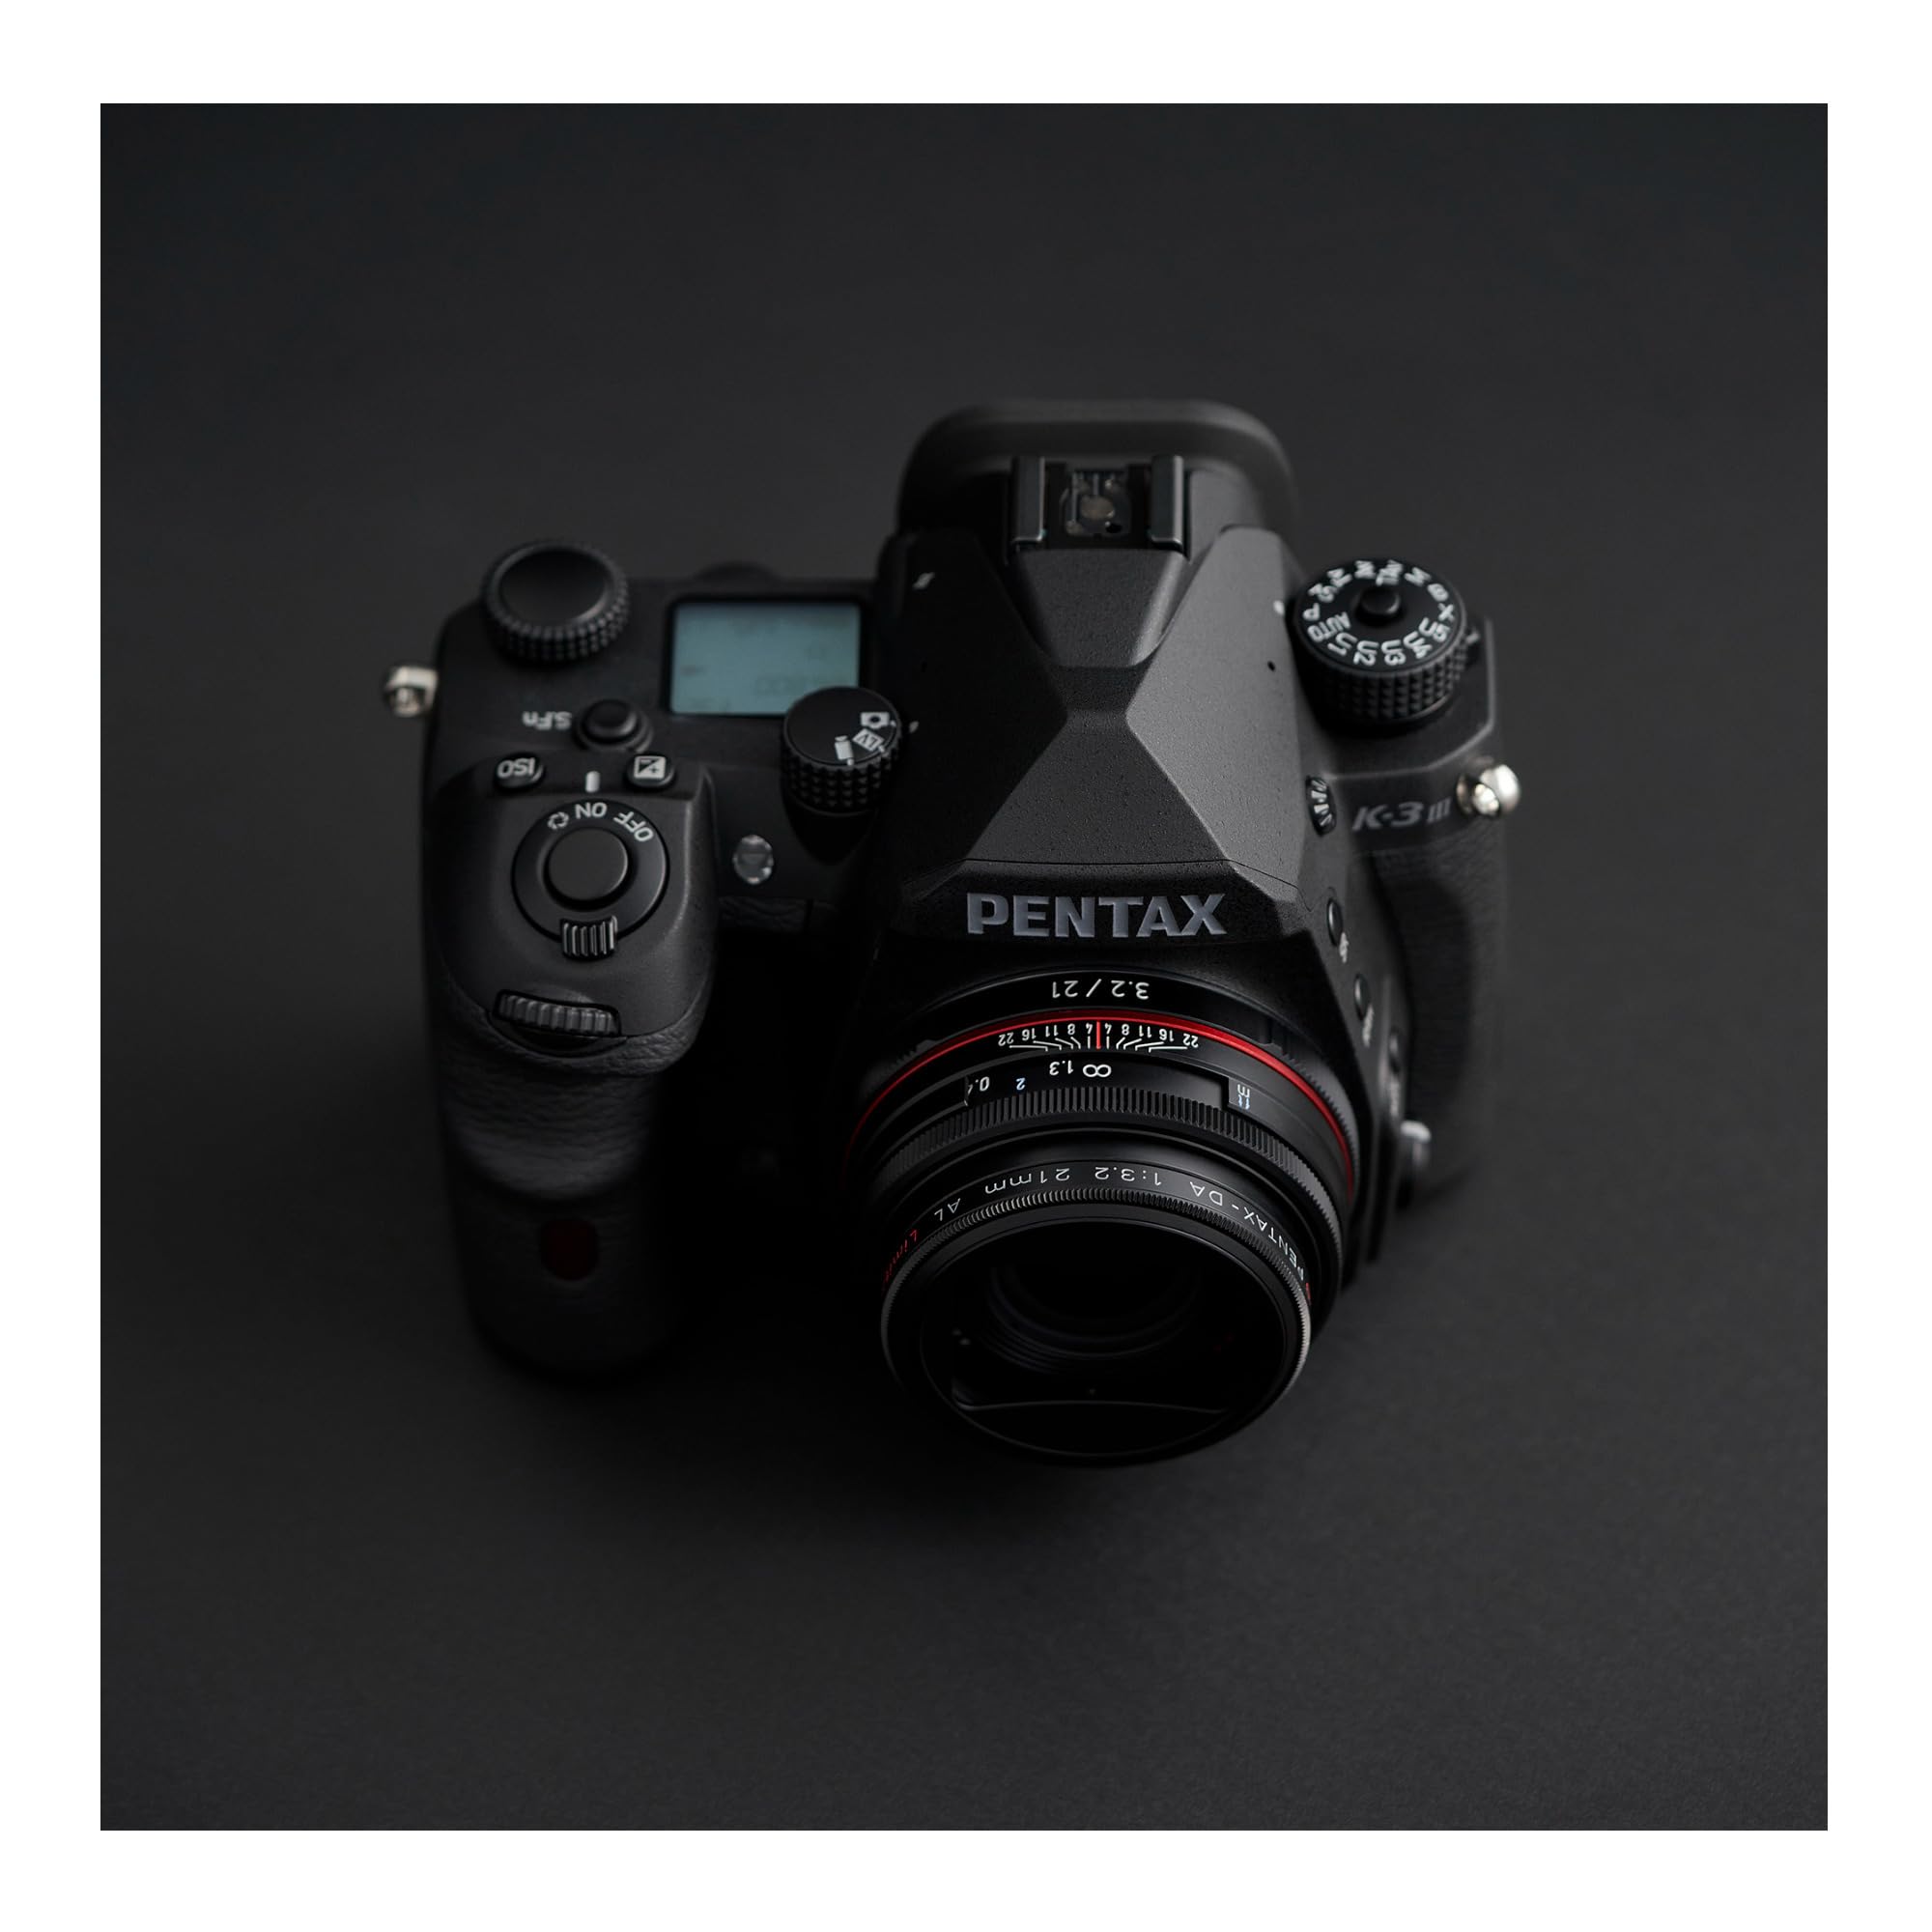 PENTAX K-3 Mark III Monochrome [A Monochrome-Specific Digital SLR Camera] [Field of View 100%, Approx. 1.05x Optical viewfinder] [Dustproof/Weather-Resistant Construction ]